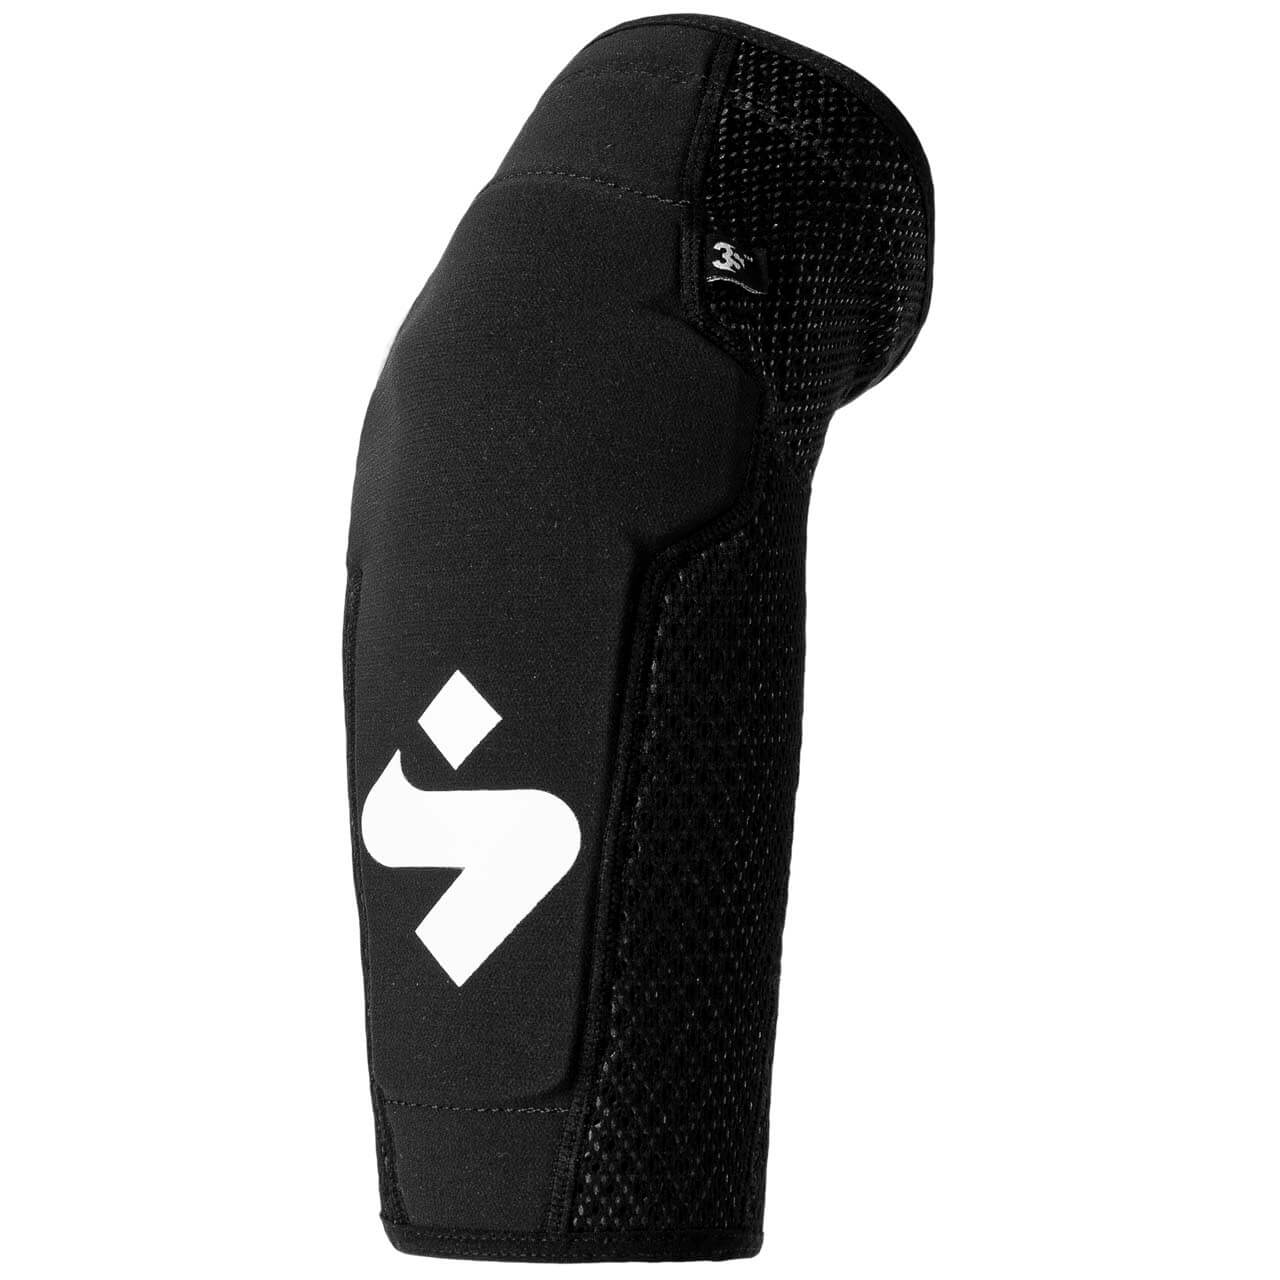 Sweet Protection Knee Guards Light - Black, XL von Sweet Protection}